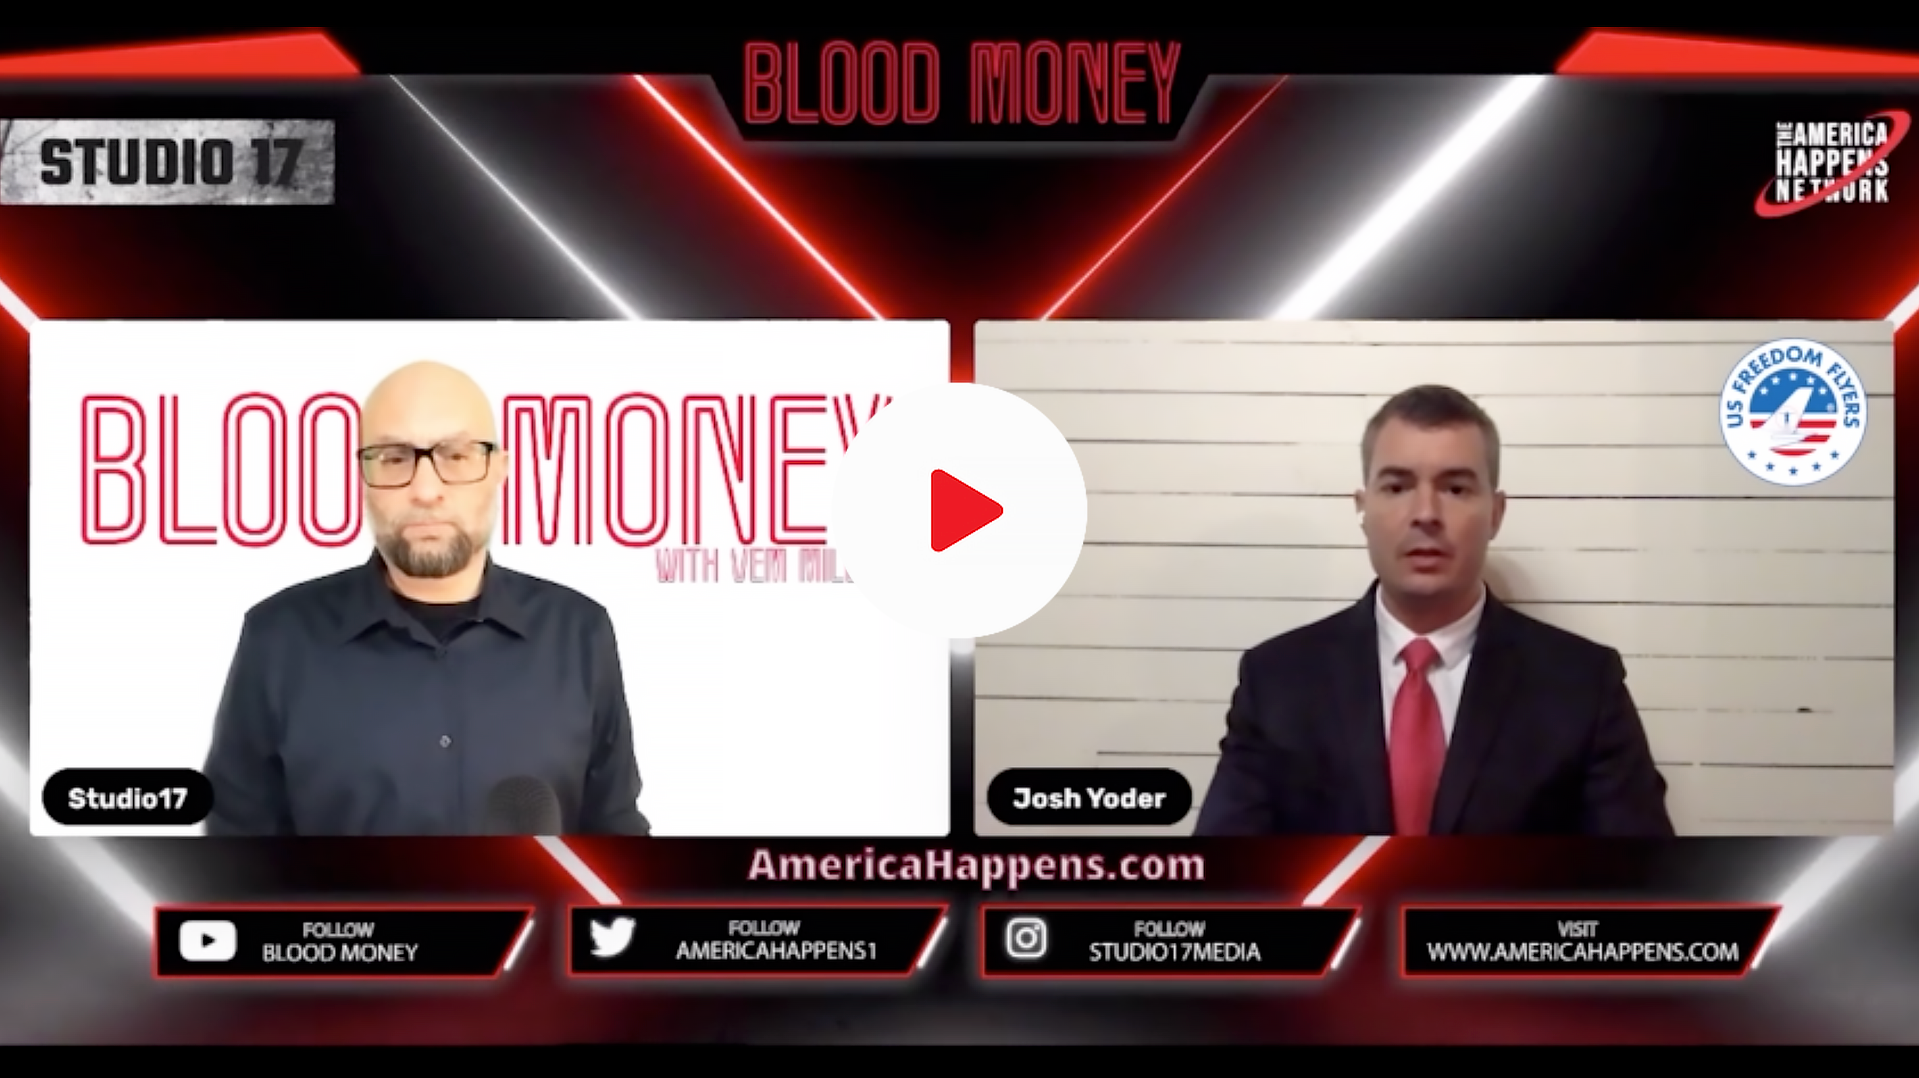 America Happens | Blood Money Ep 36 with Josh Yoder “How the FAA has violated public trust”